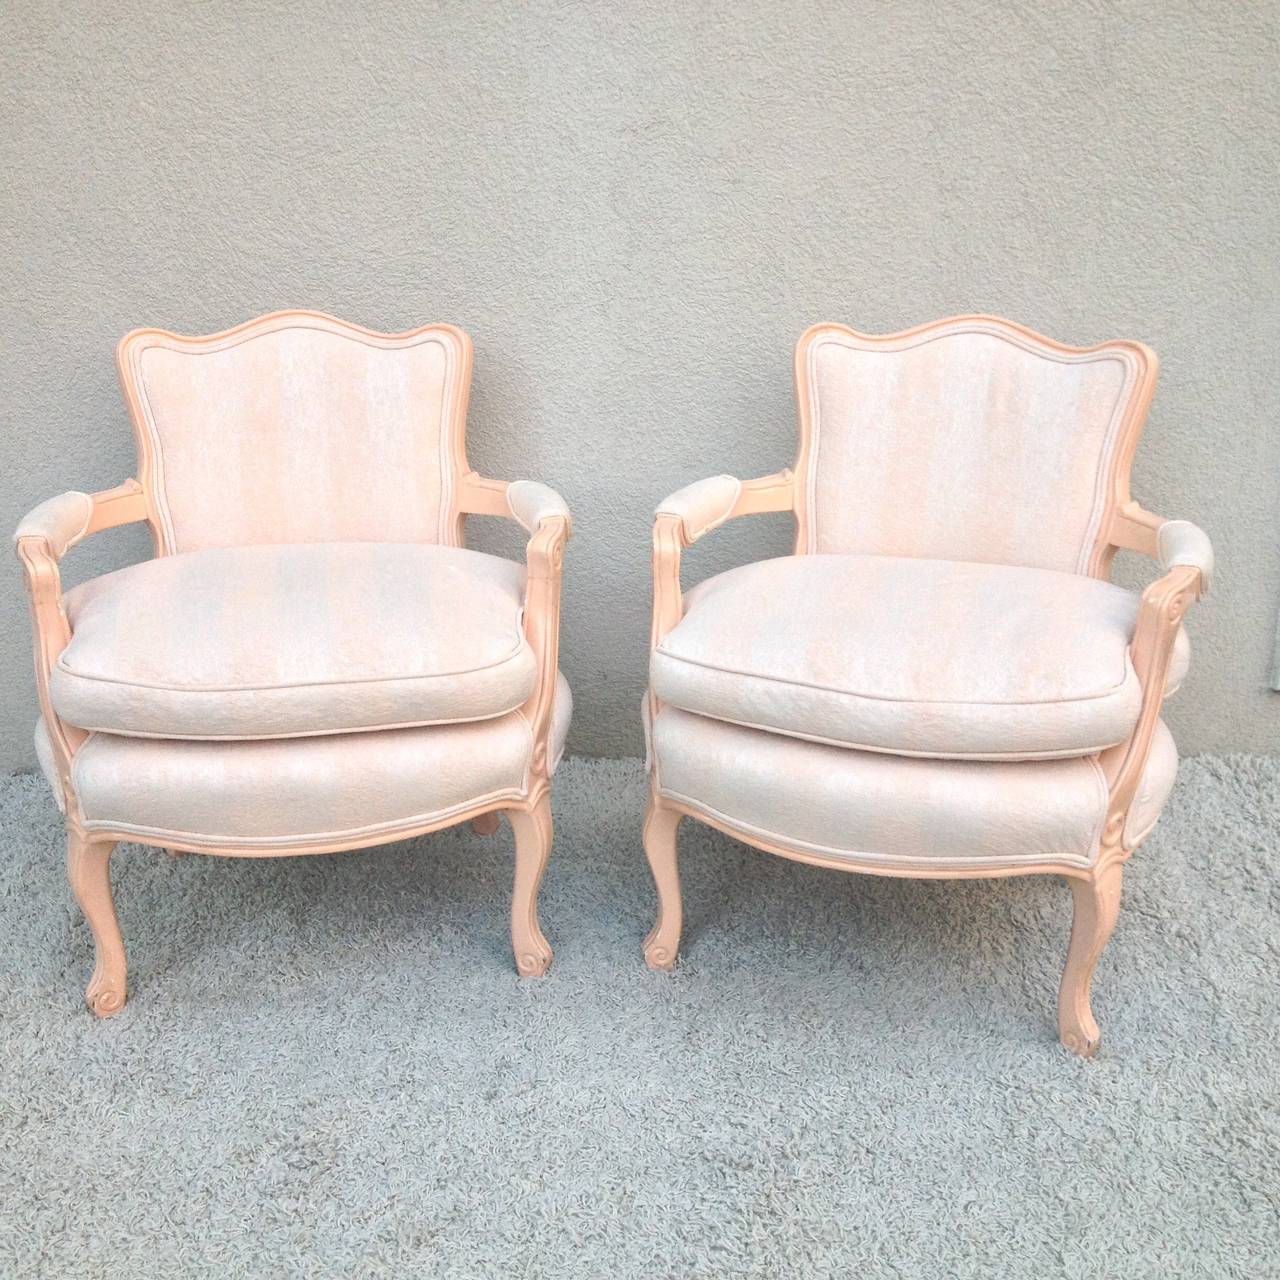 Pair petite Fauteuil Lois XV Chairs Salmon pink lacquered finish with off white and soft pink weaved fabric original in very good condition.